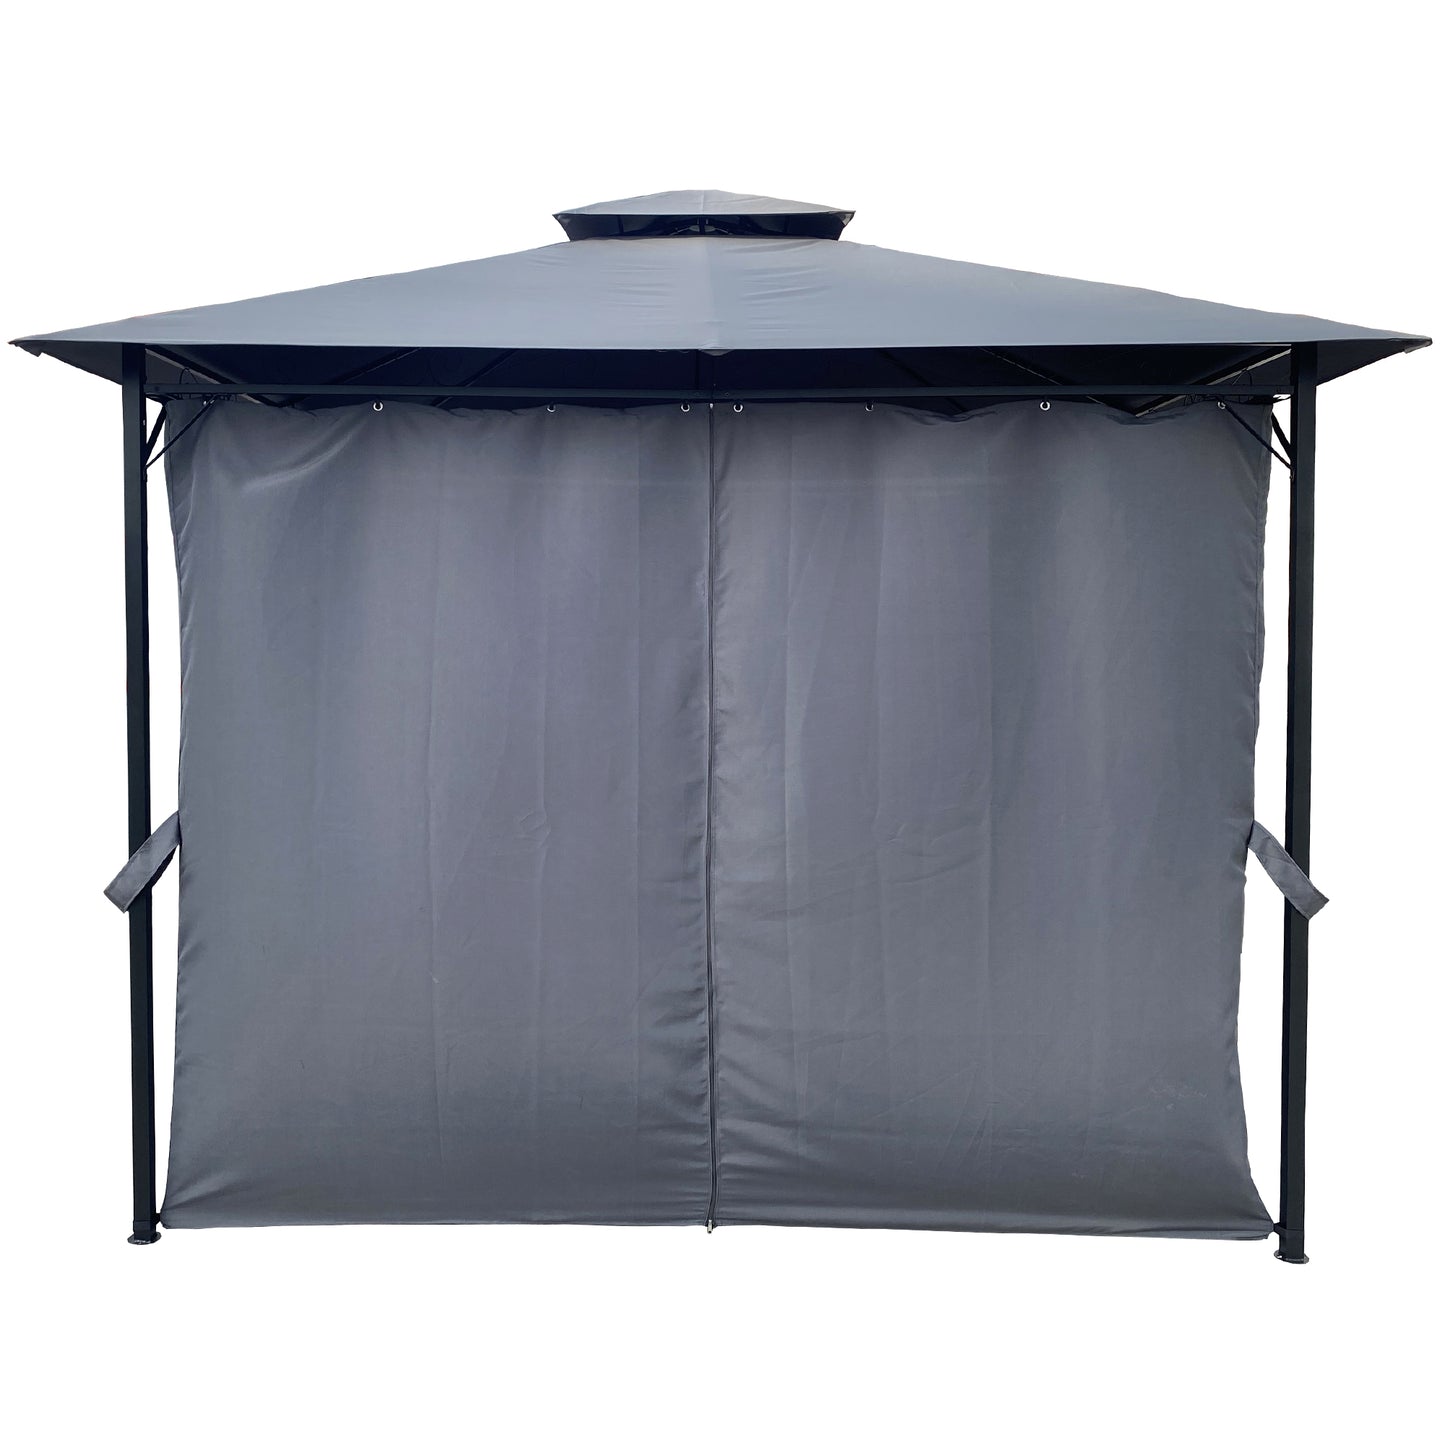 10x10Ft Gray Canopy Outdoor Patio Garden Gazebo Tent With Curtains